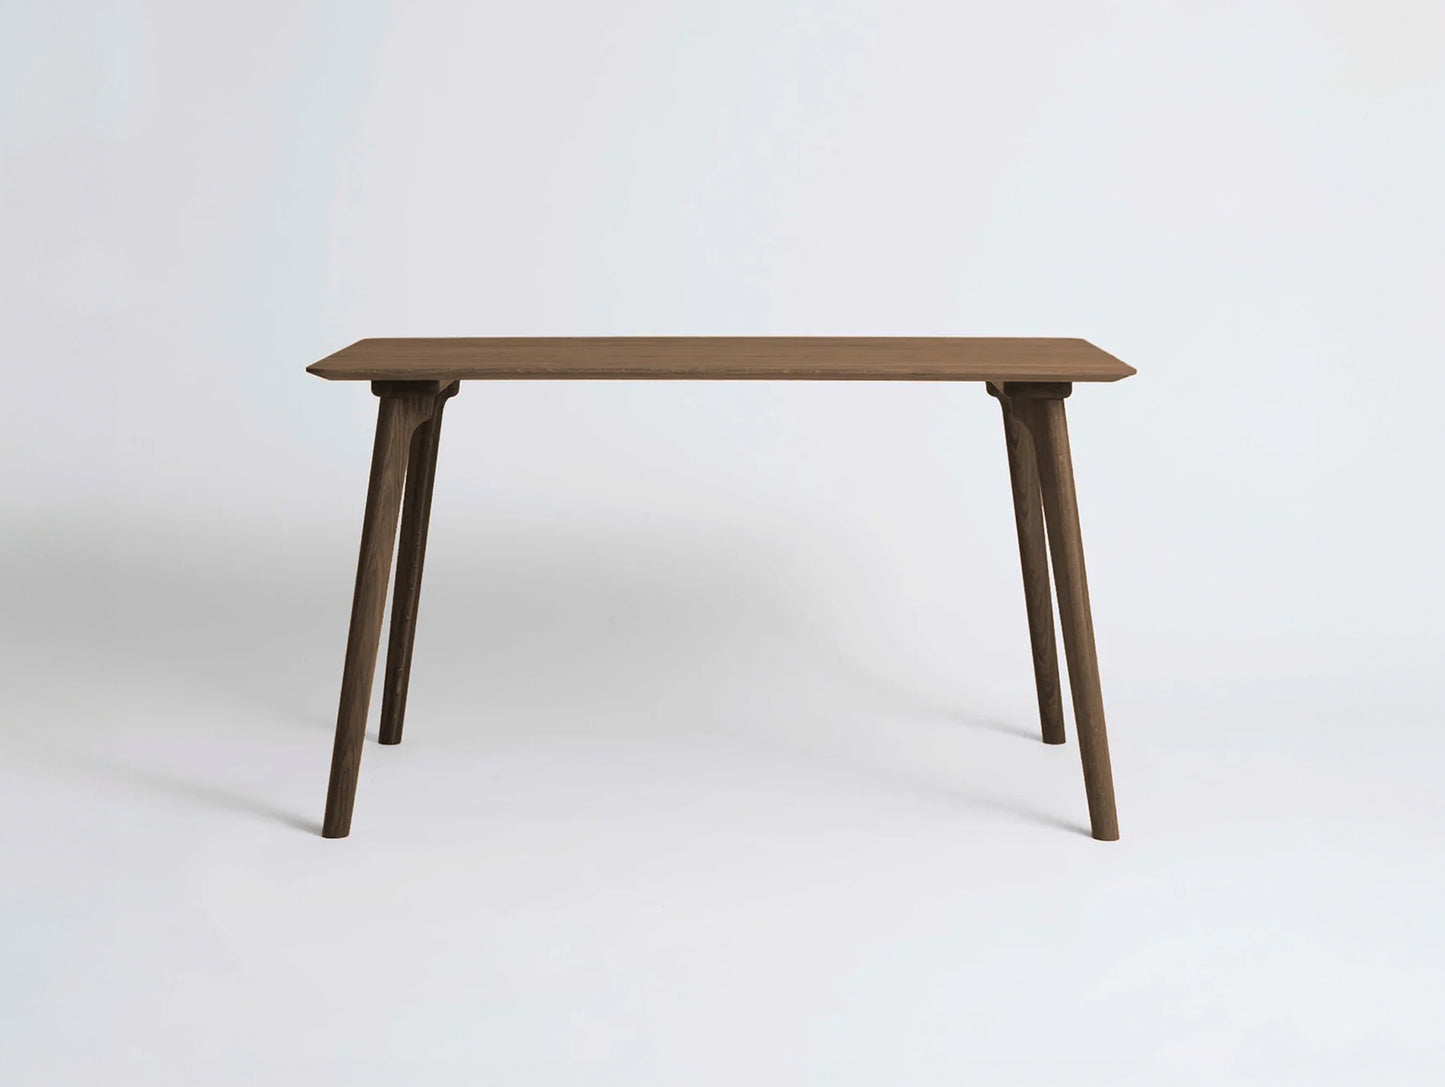 Salon Writing Desk by Ro Collection - Smoked Oak